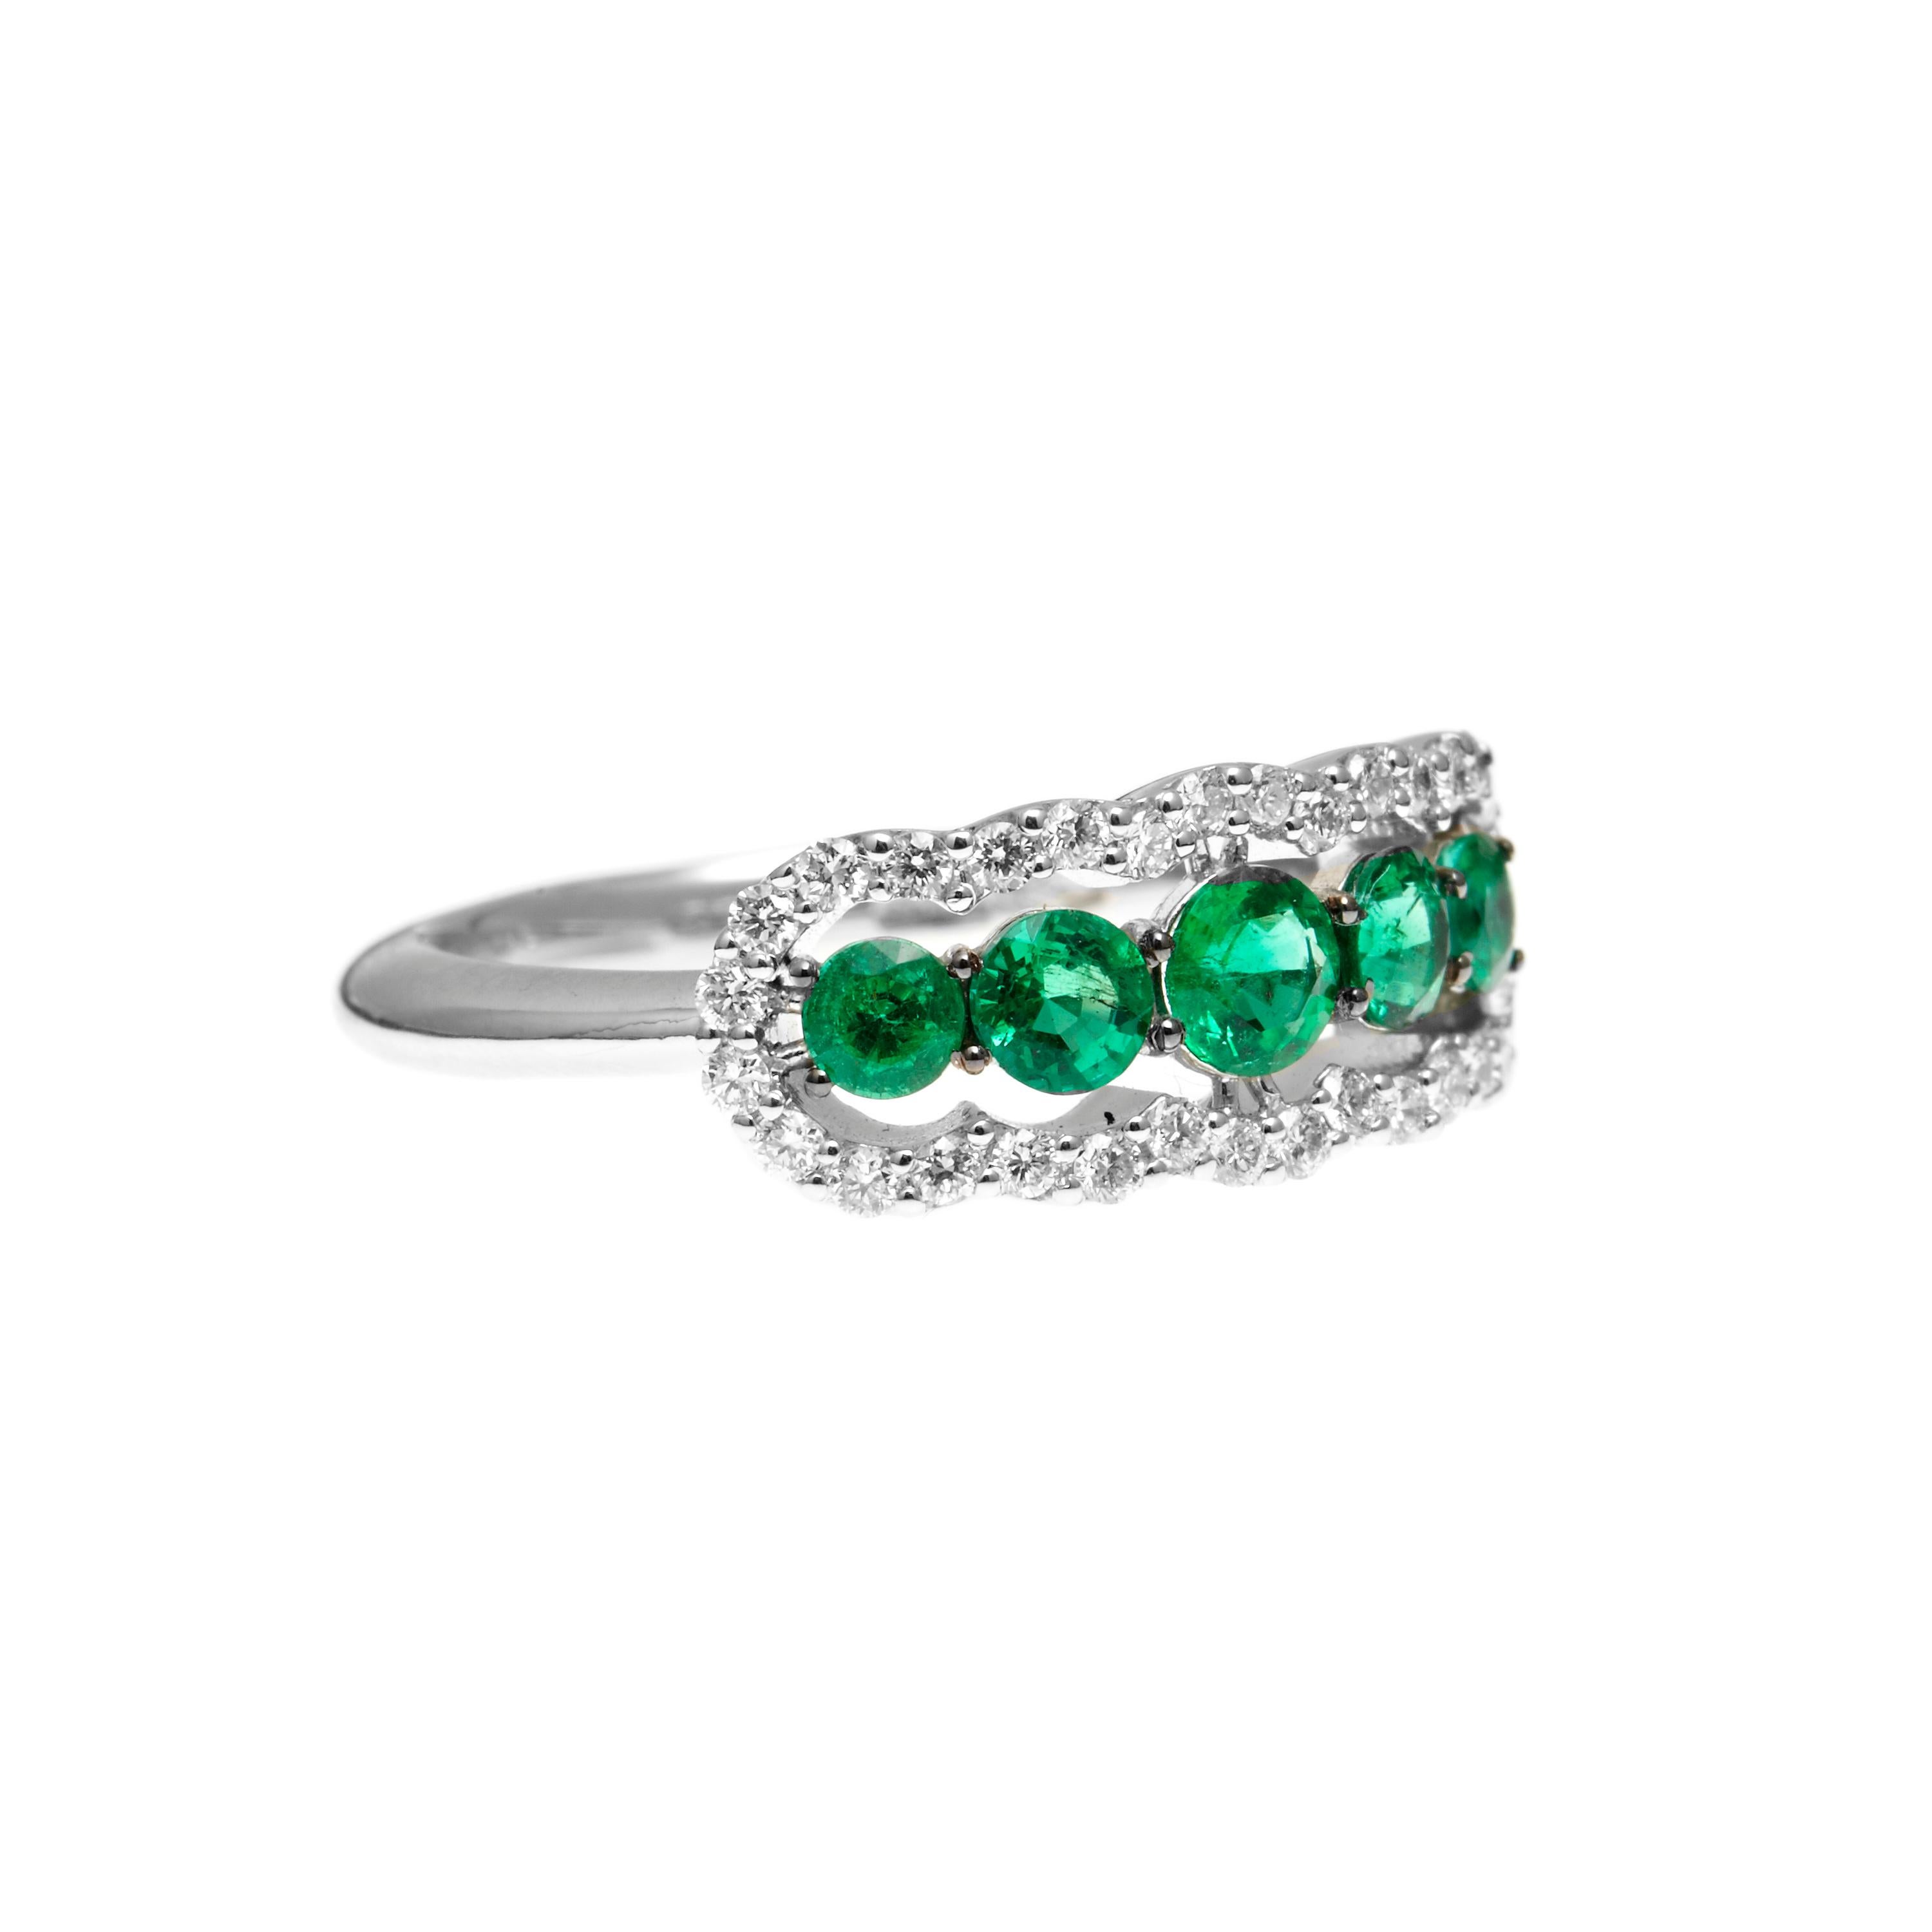 The fabulous everyday ring is perfect when you want to match some bold green tones with your outfit. 5 graduated round emeralds form a bold green row and total 0.74ct and are surrounded by 0.30ct of white diamonds to give it a nice pop.